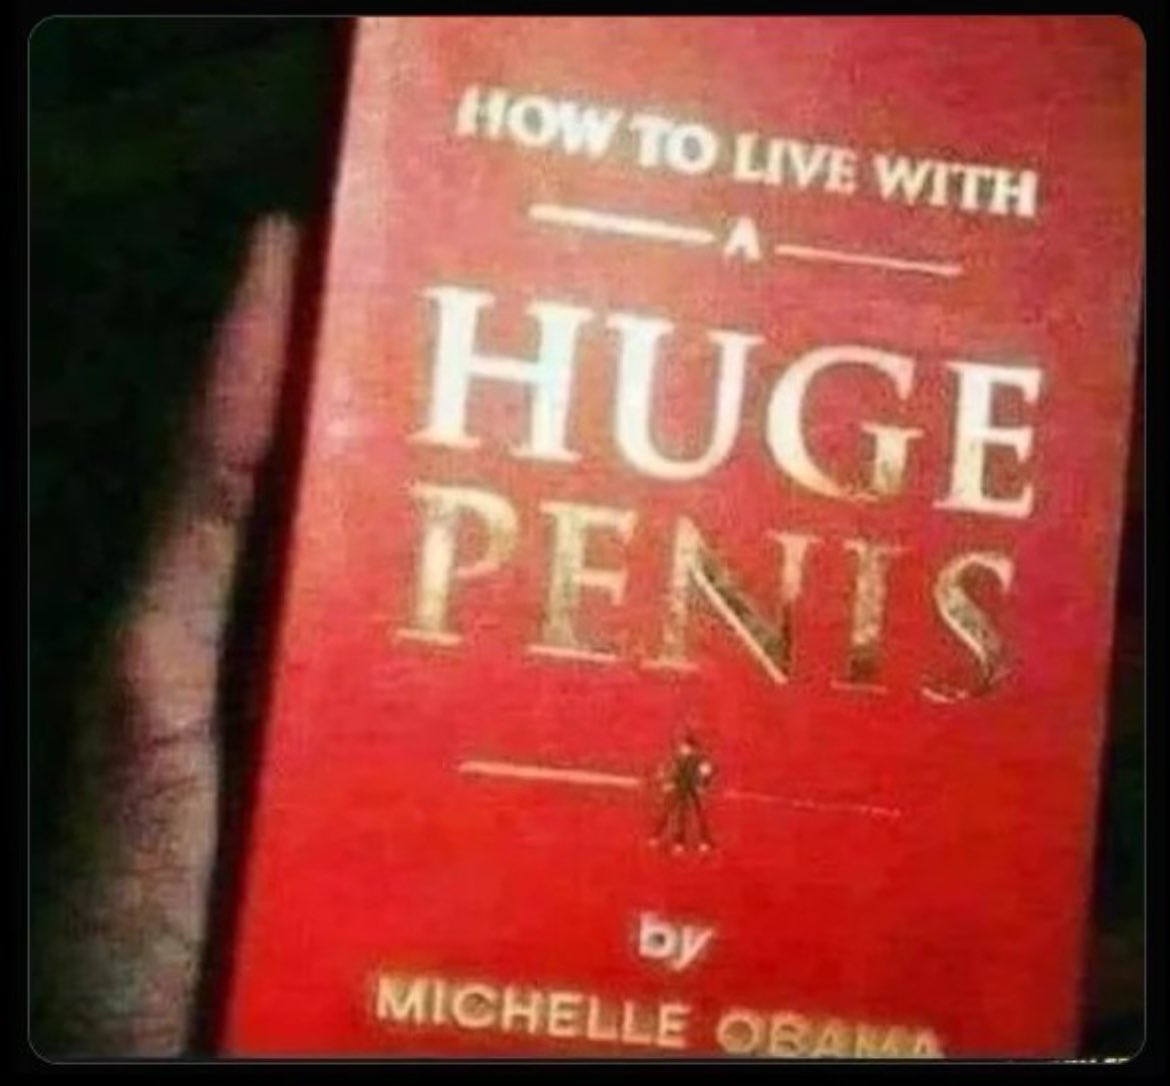 NY Times bestseller